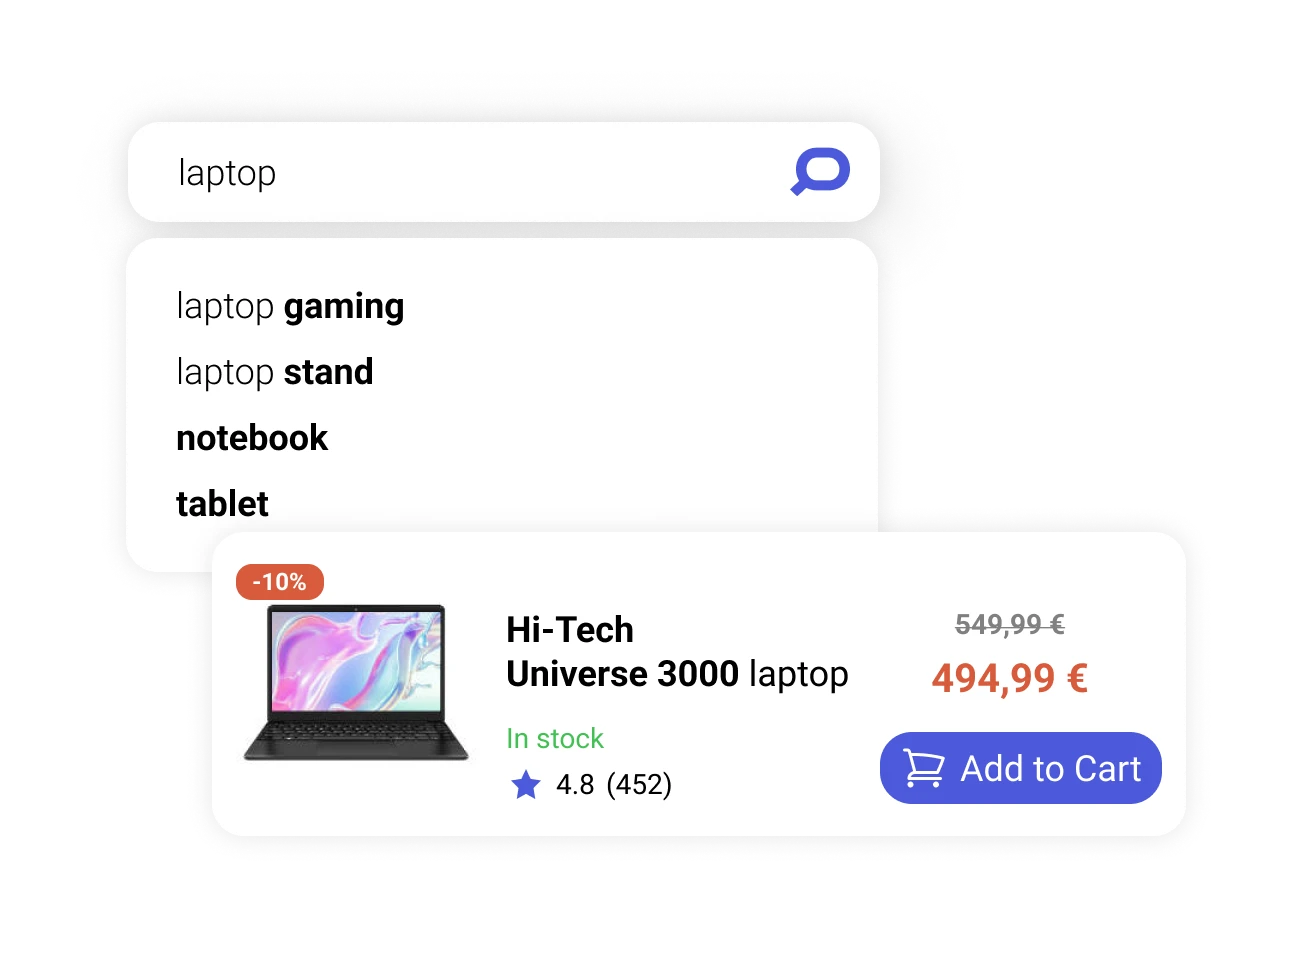 Rich Autocomplete feature deciphers user intent and immediately offers search query, category, and product suggestion when shoppers click into the search box.